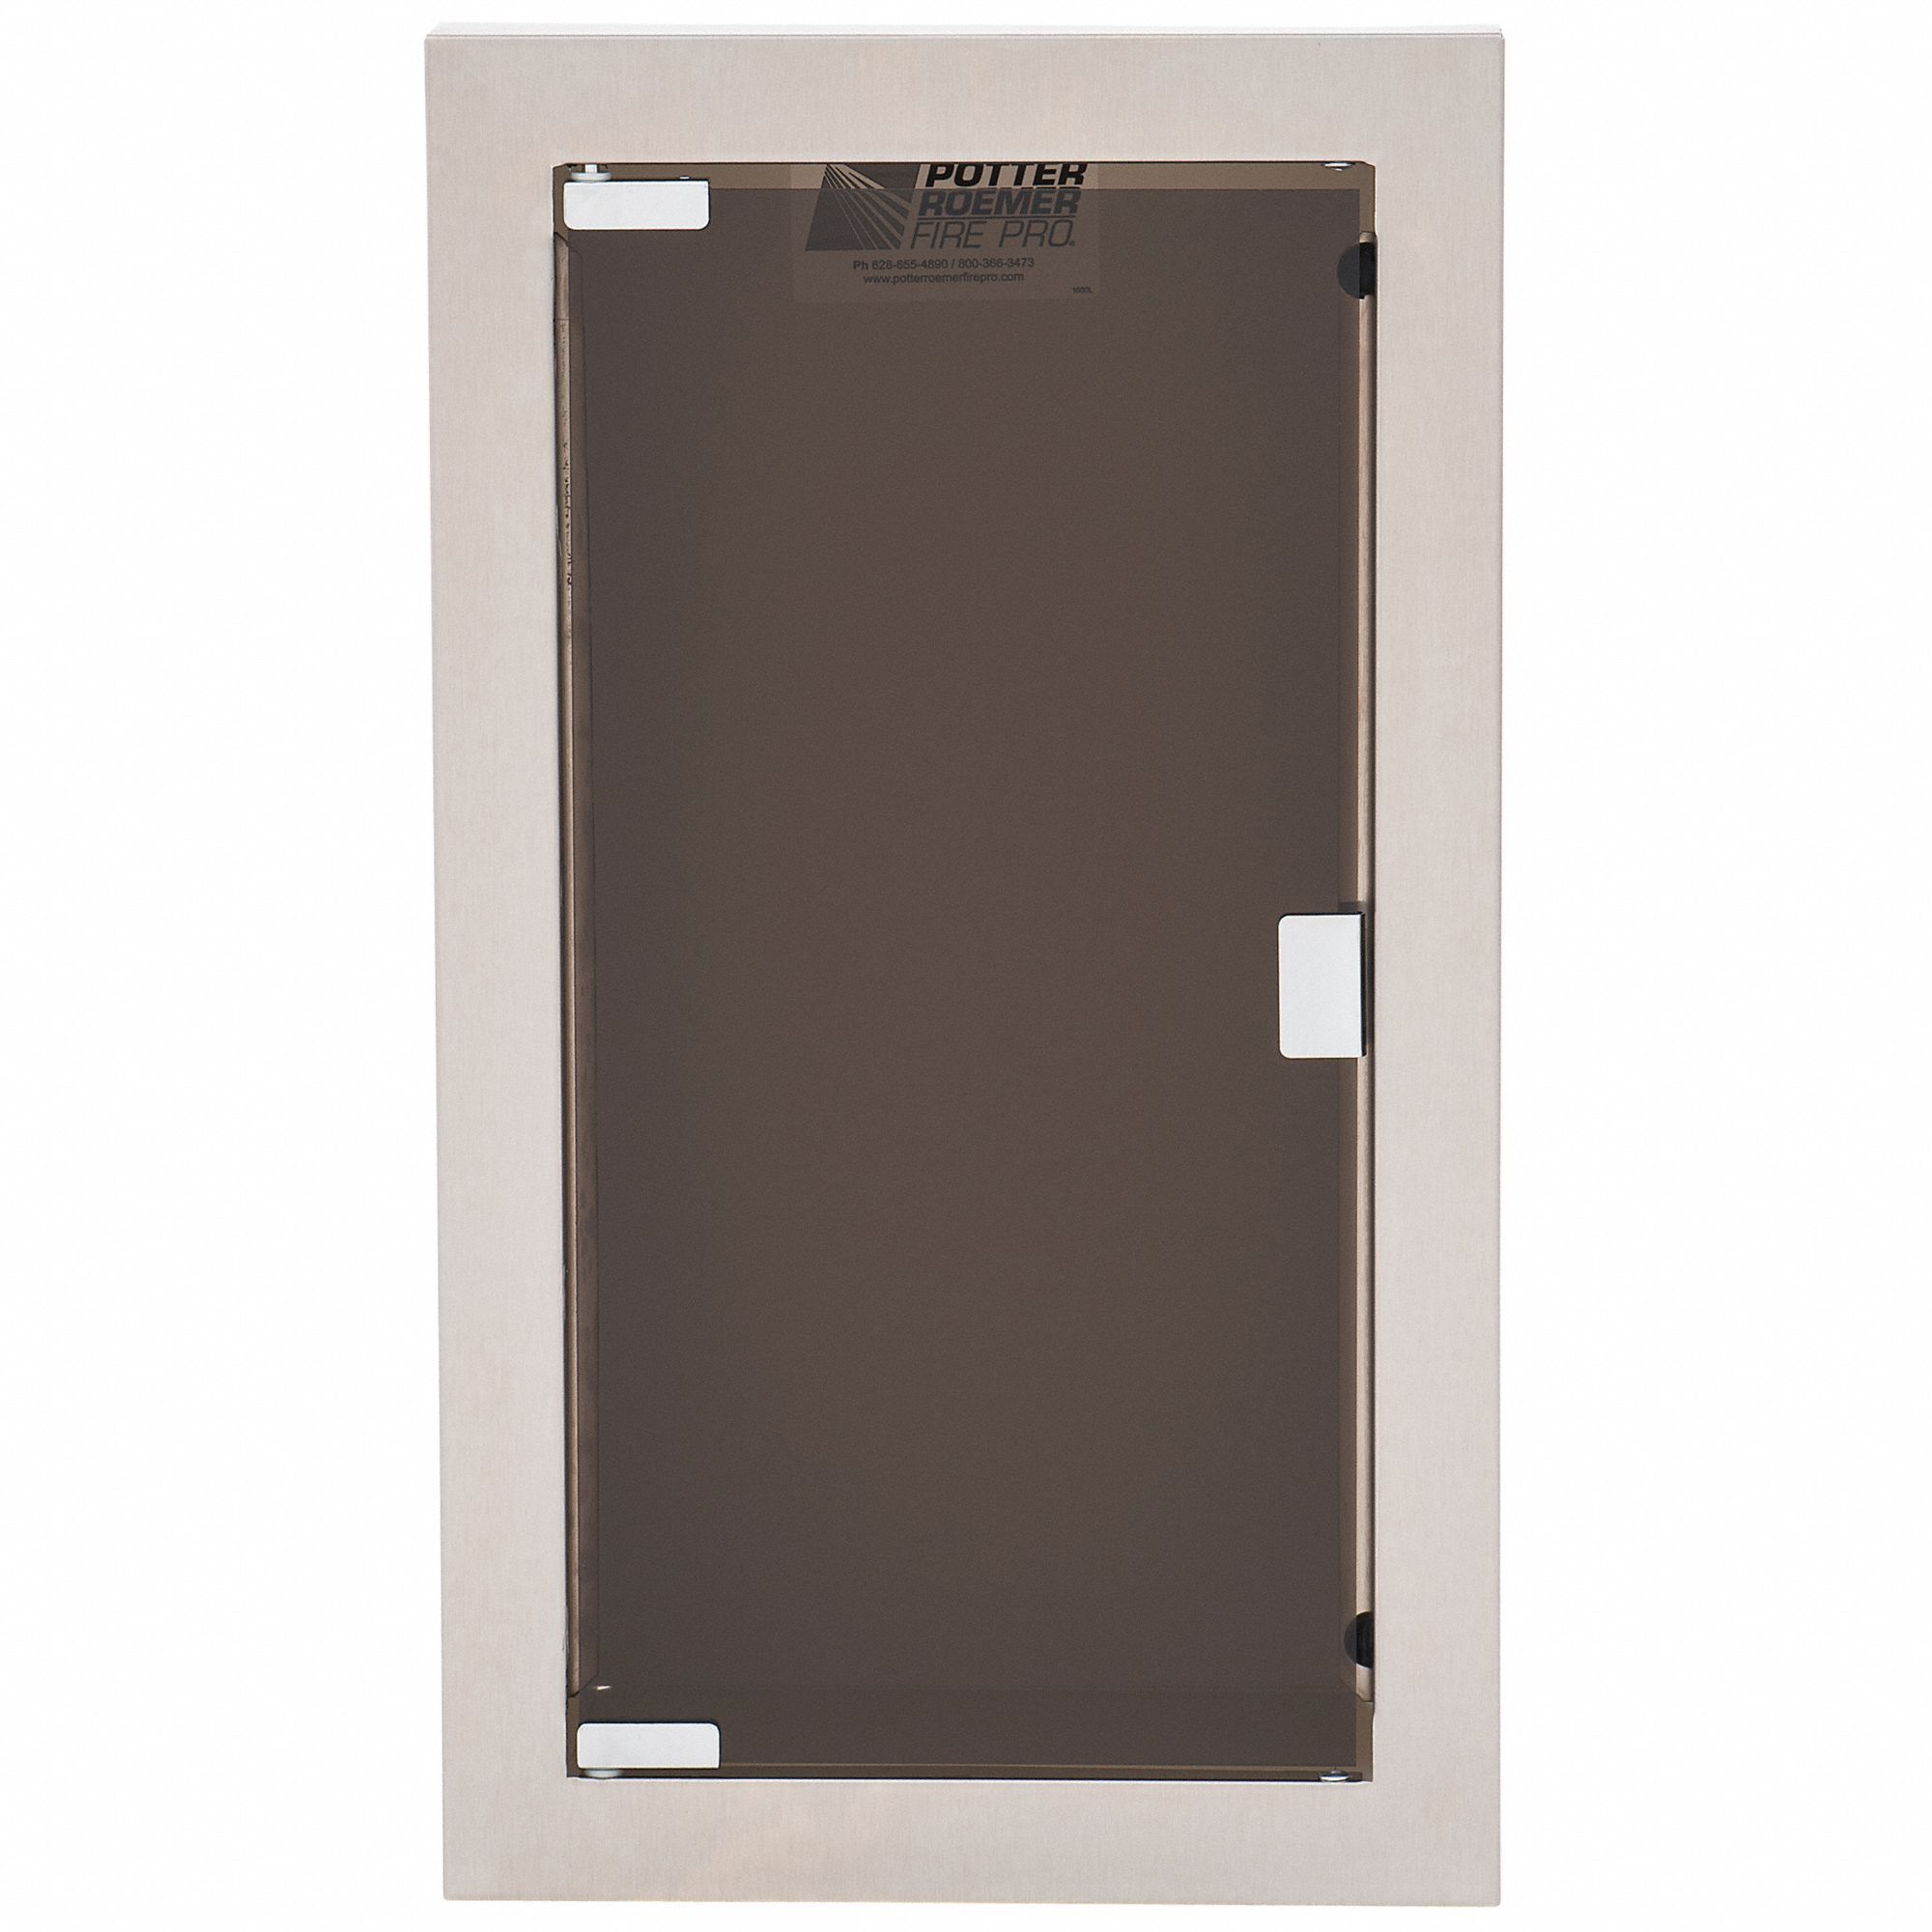 Fire Extinguisher Cabinet: Semi Recessed Mounting, 5 lb Capacity, Stainless Steel, Acrylic